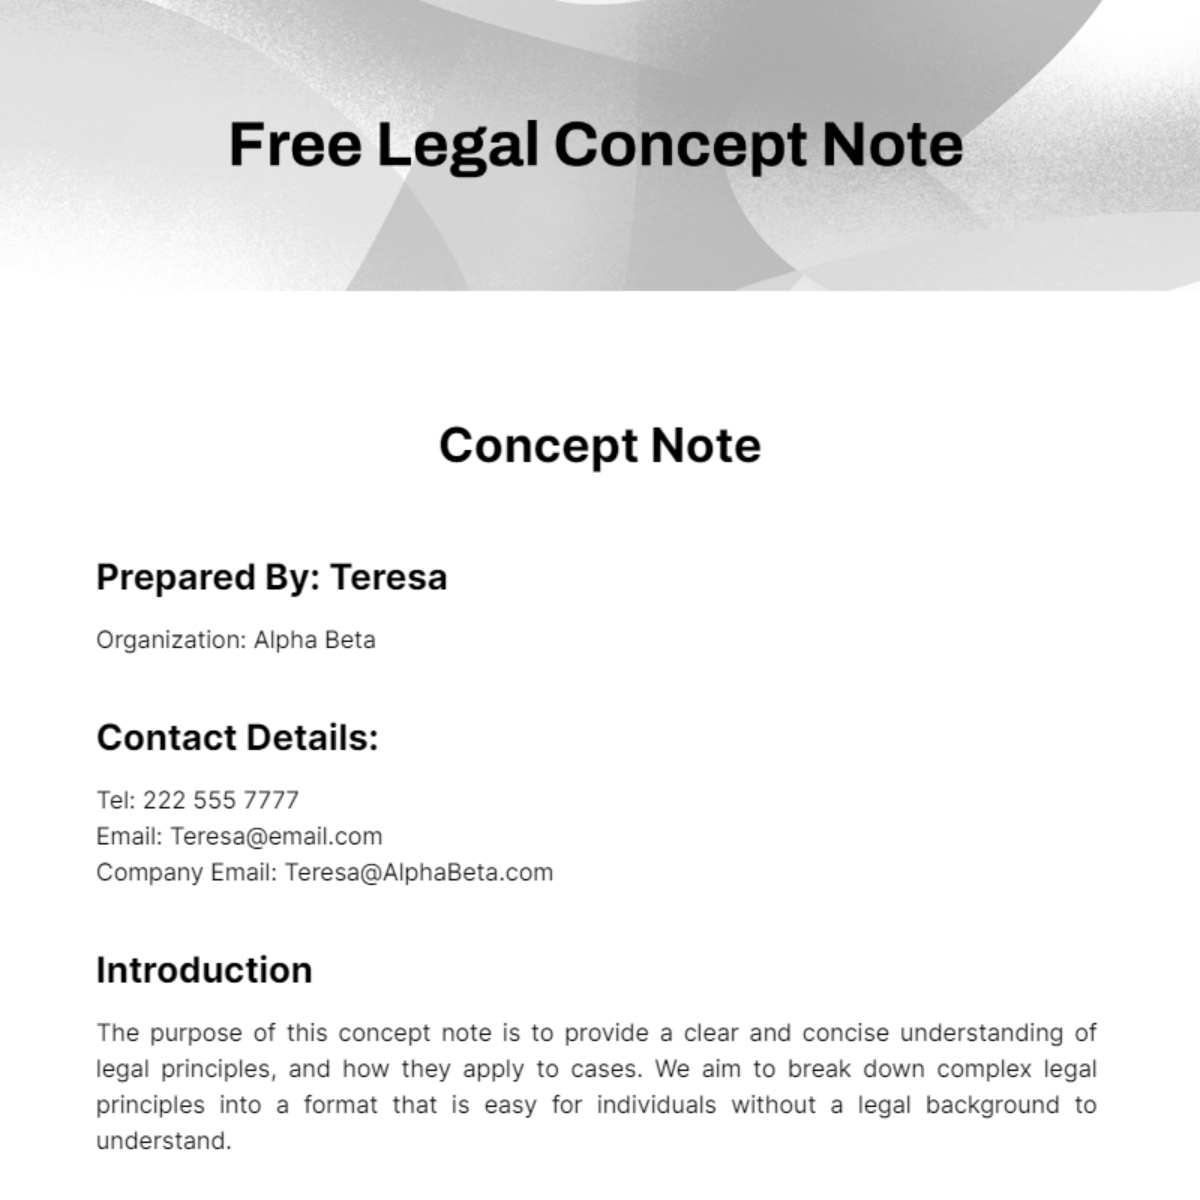 Free Legal Concept Note Template